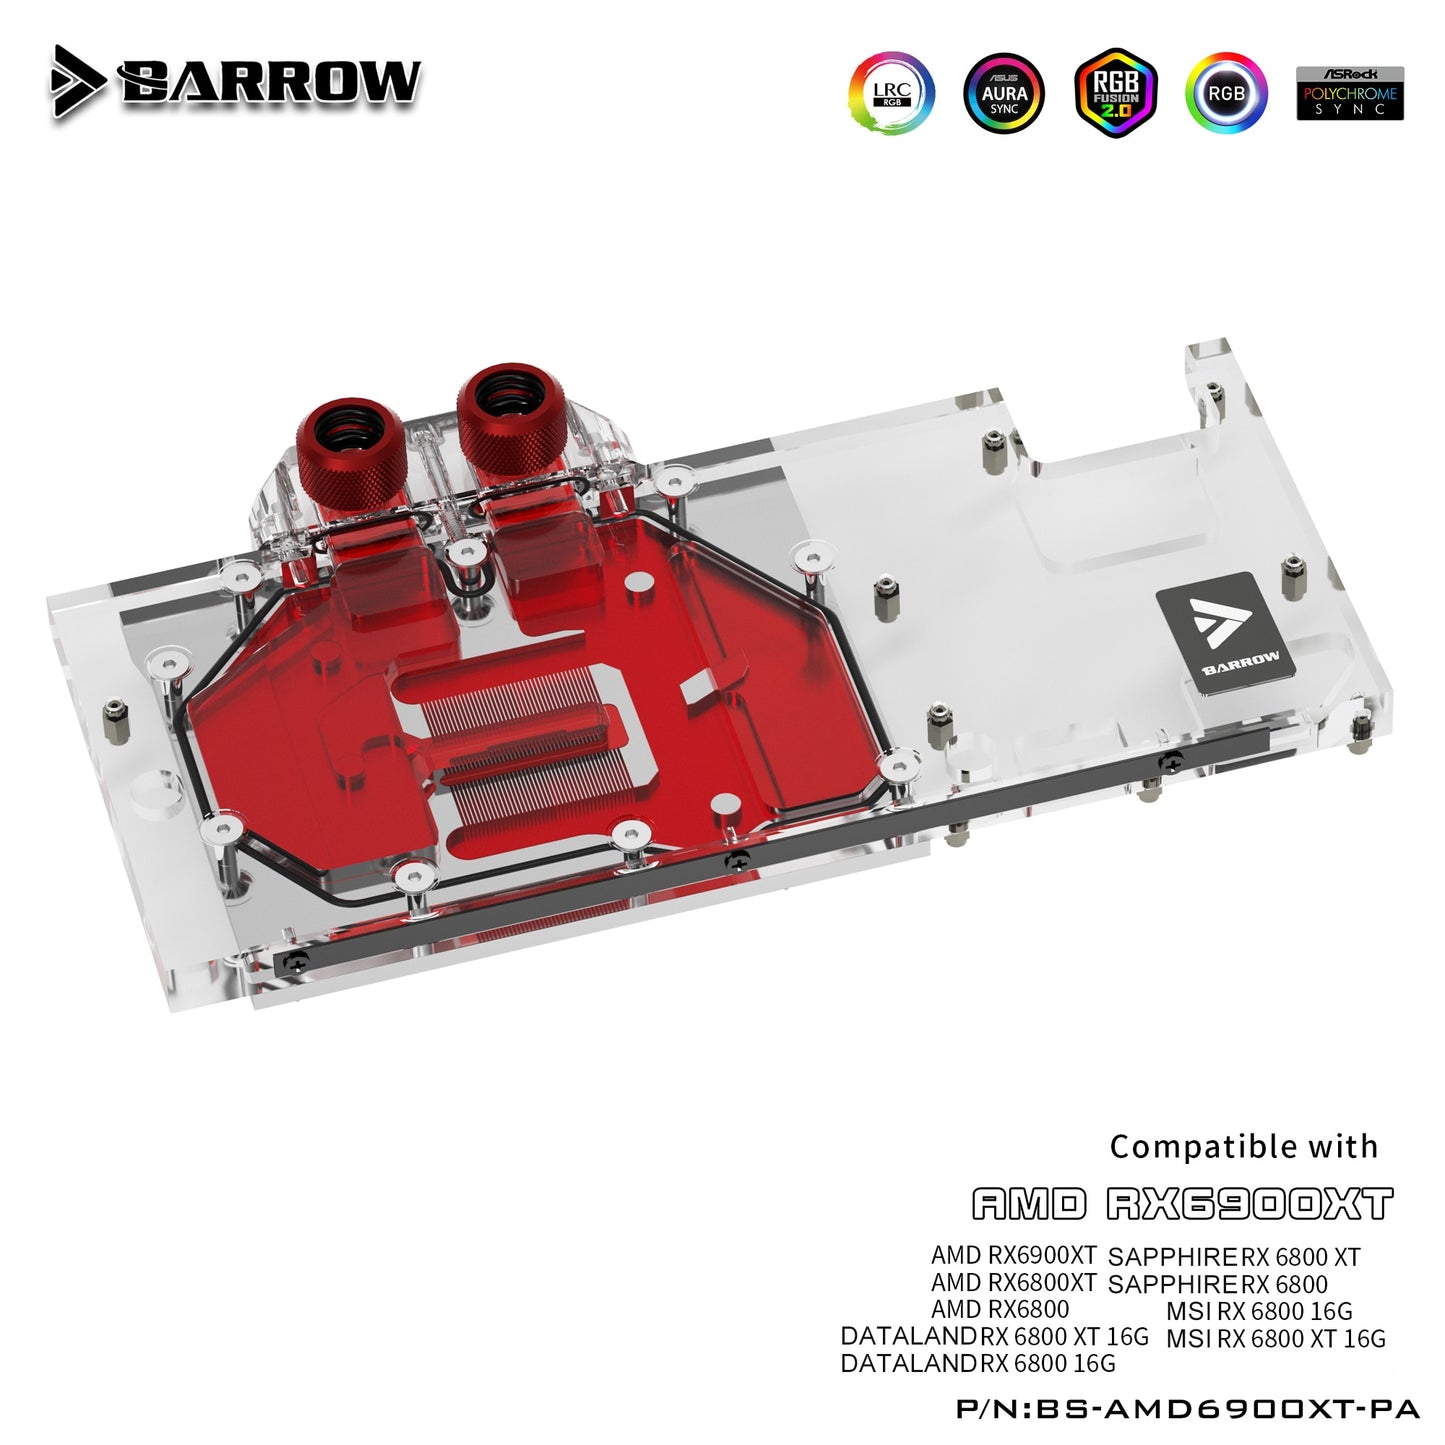 BARROW 6900 GPU Water Cooling Block, Full coverage For AMD Founder Edition MSI Sapphire RX 6900 6800 XT, BS-AMD6900XT-PA